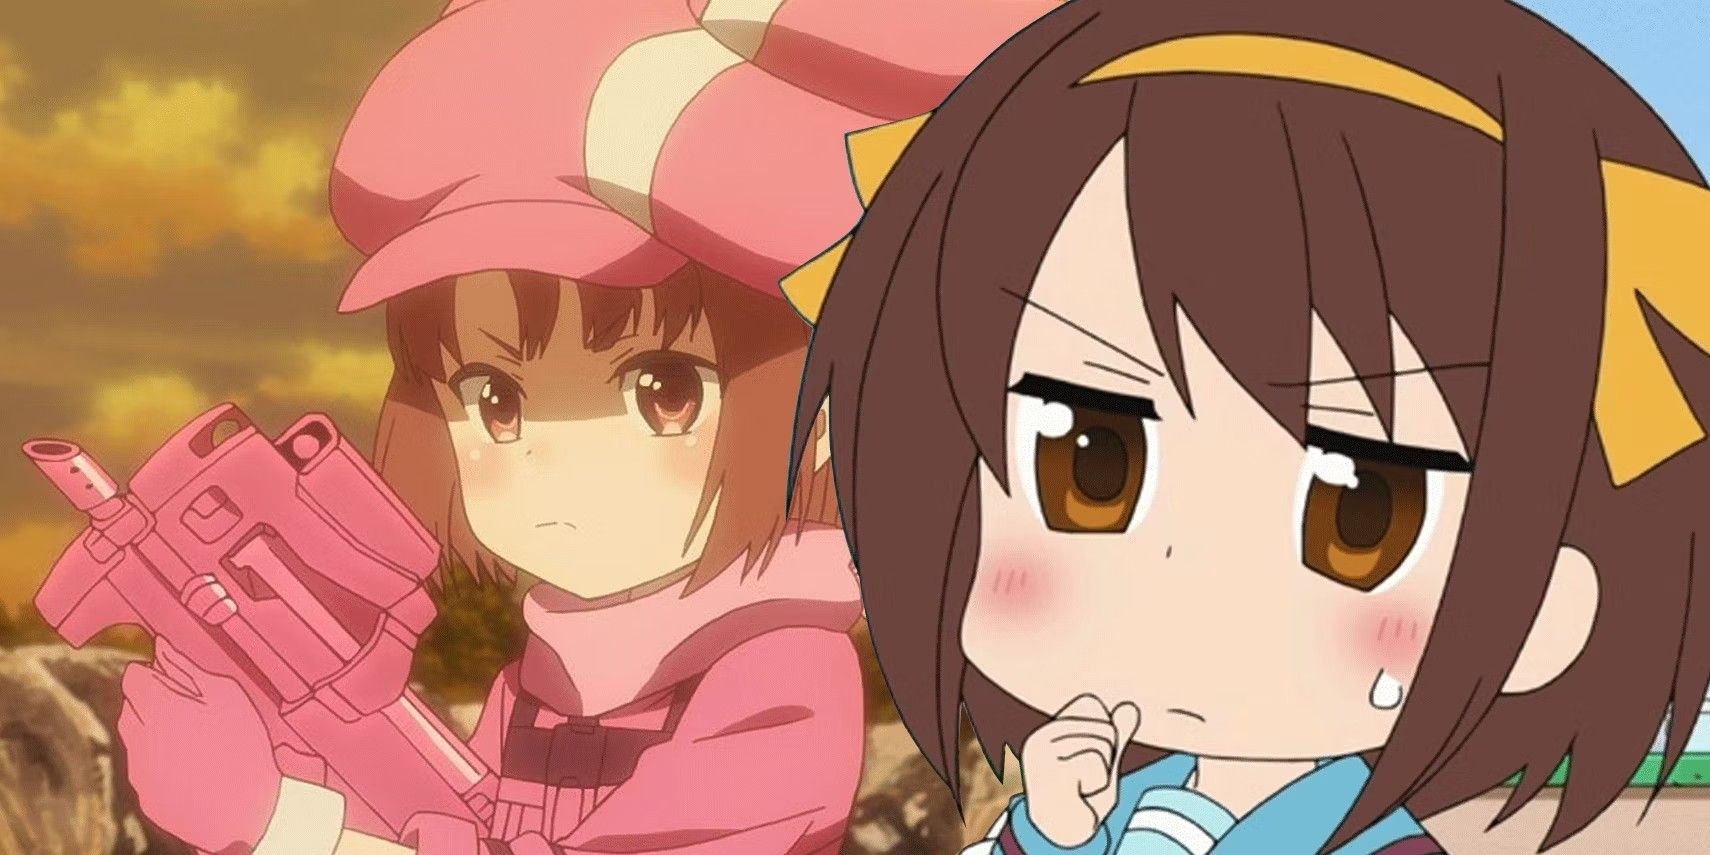 Karen gets ready and Haruhi Chan thinks to herself